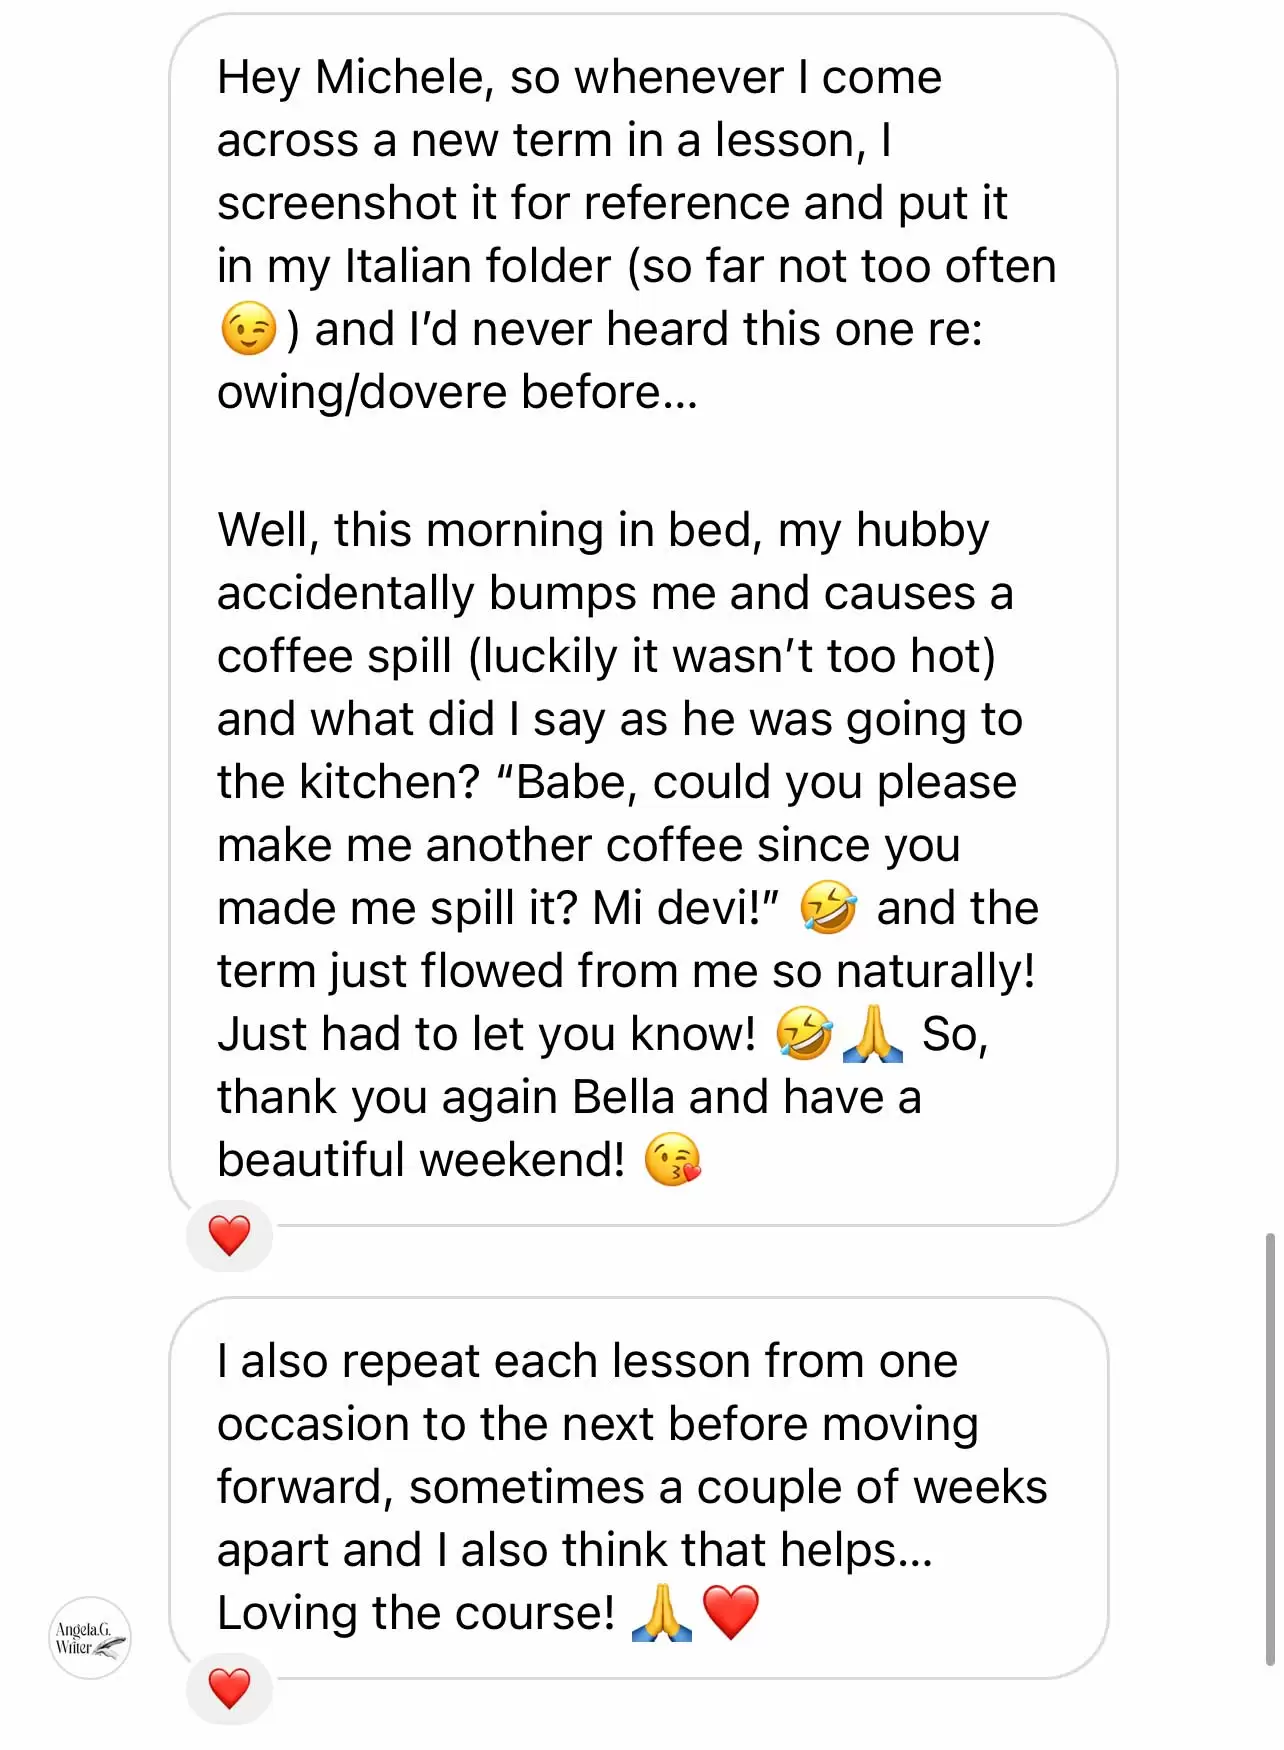 Intrepid Italian Student Testimonial - It just flowed from me naturally